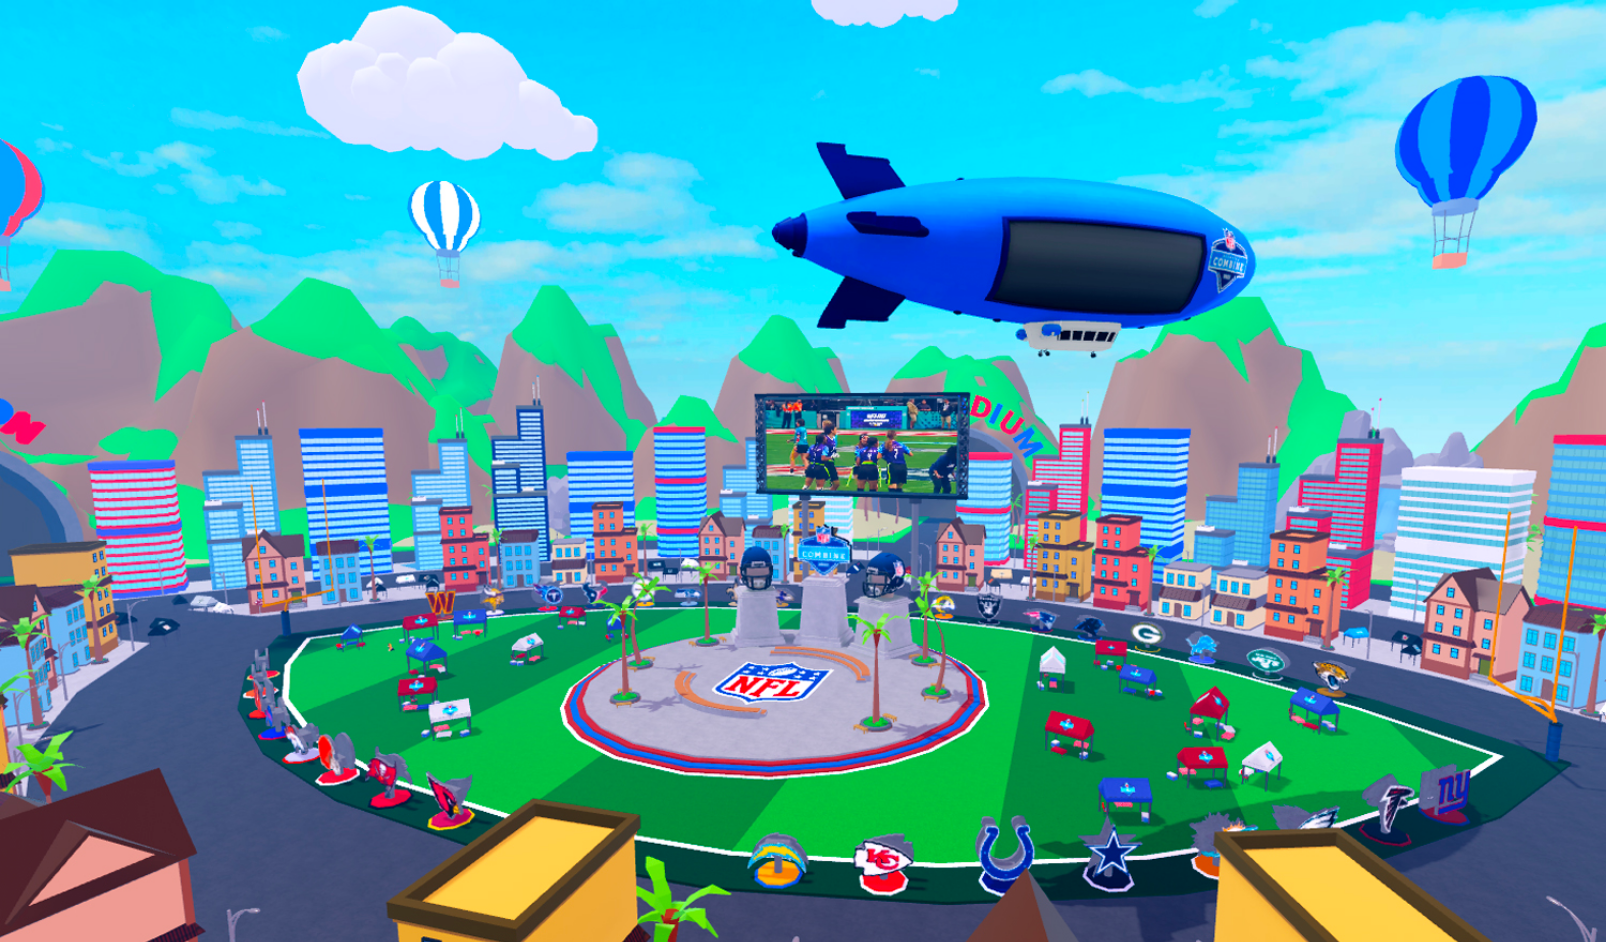 Building on metaverse successes. How Gamefam's Roblox strategy delivered a  triumphant year